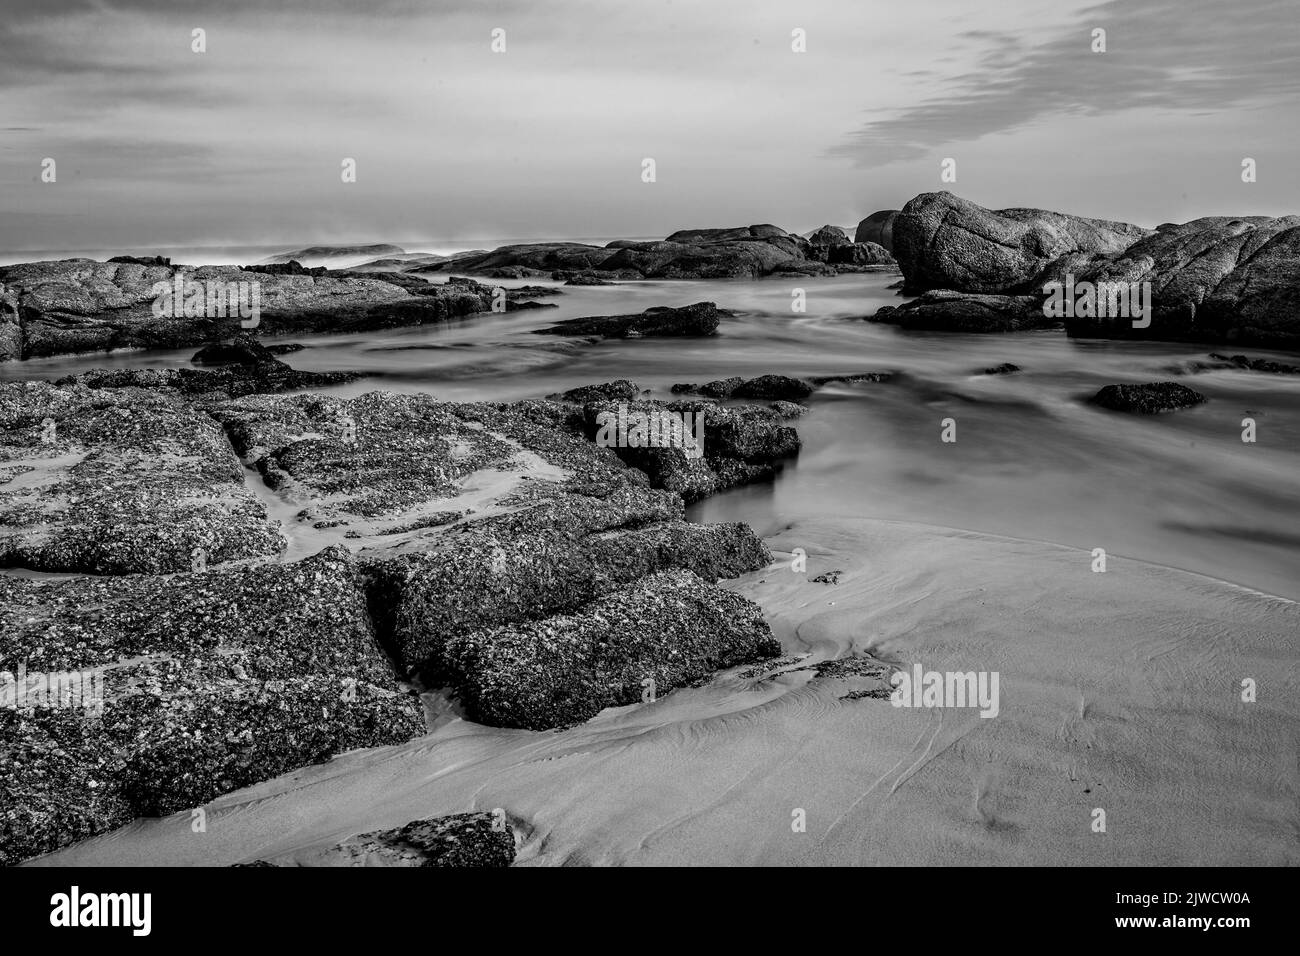 A long exposure grayscale of a rocky shore in Cape Town, at Camps Bay ...